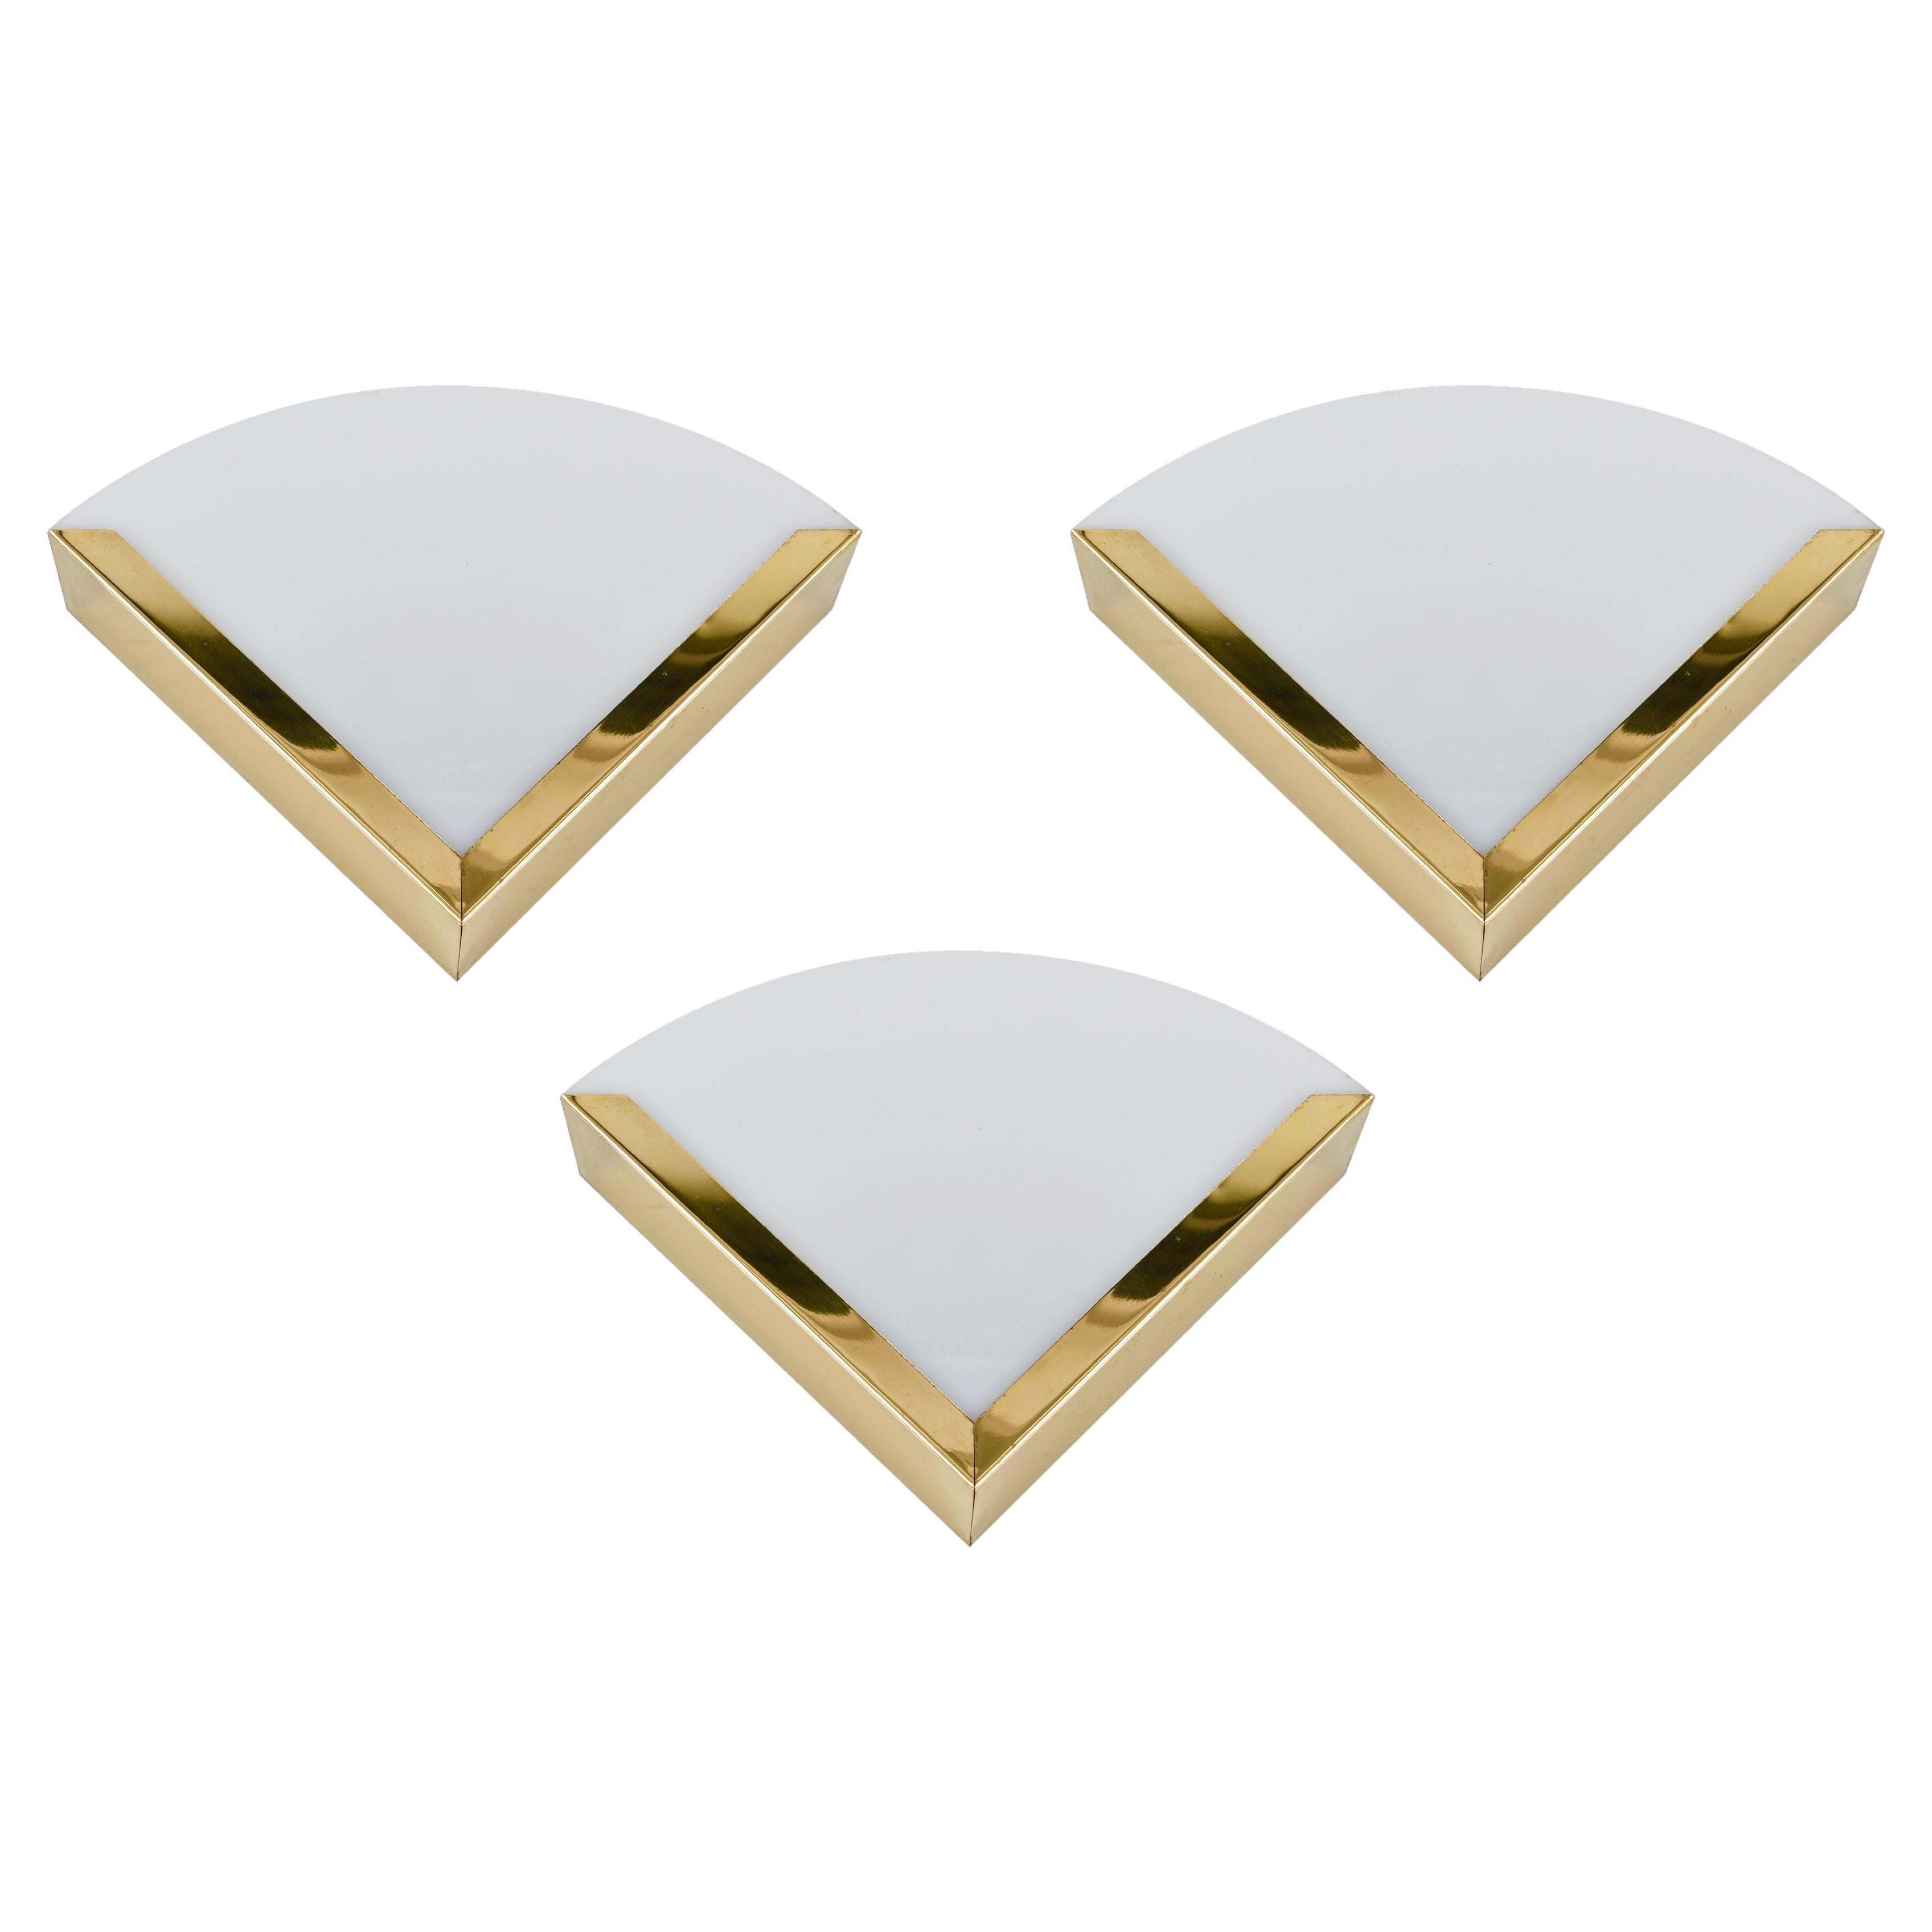 Italian Triangular Sconces in Brass and White Perspex, Italy 1970s For Sale